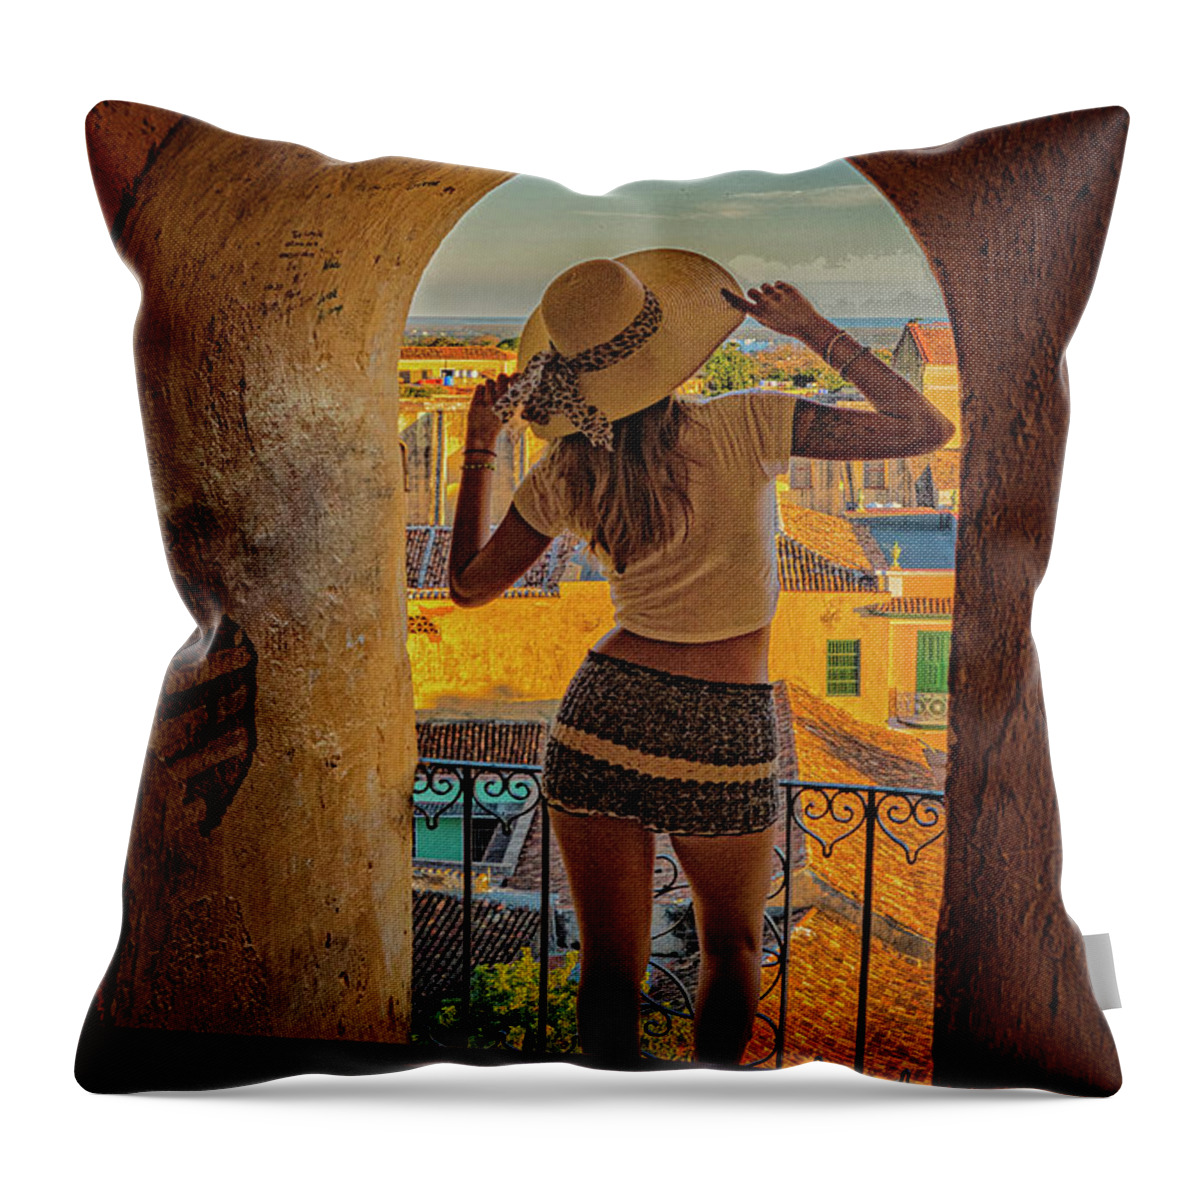 Havana Cuba Throw Pillow featuring the photograph Woman In Tower Window by Tom Singleton